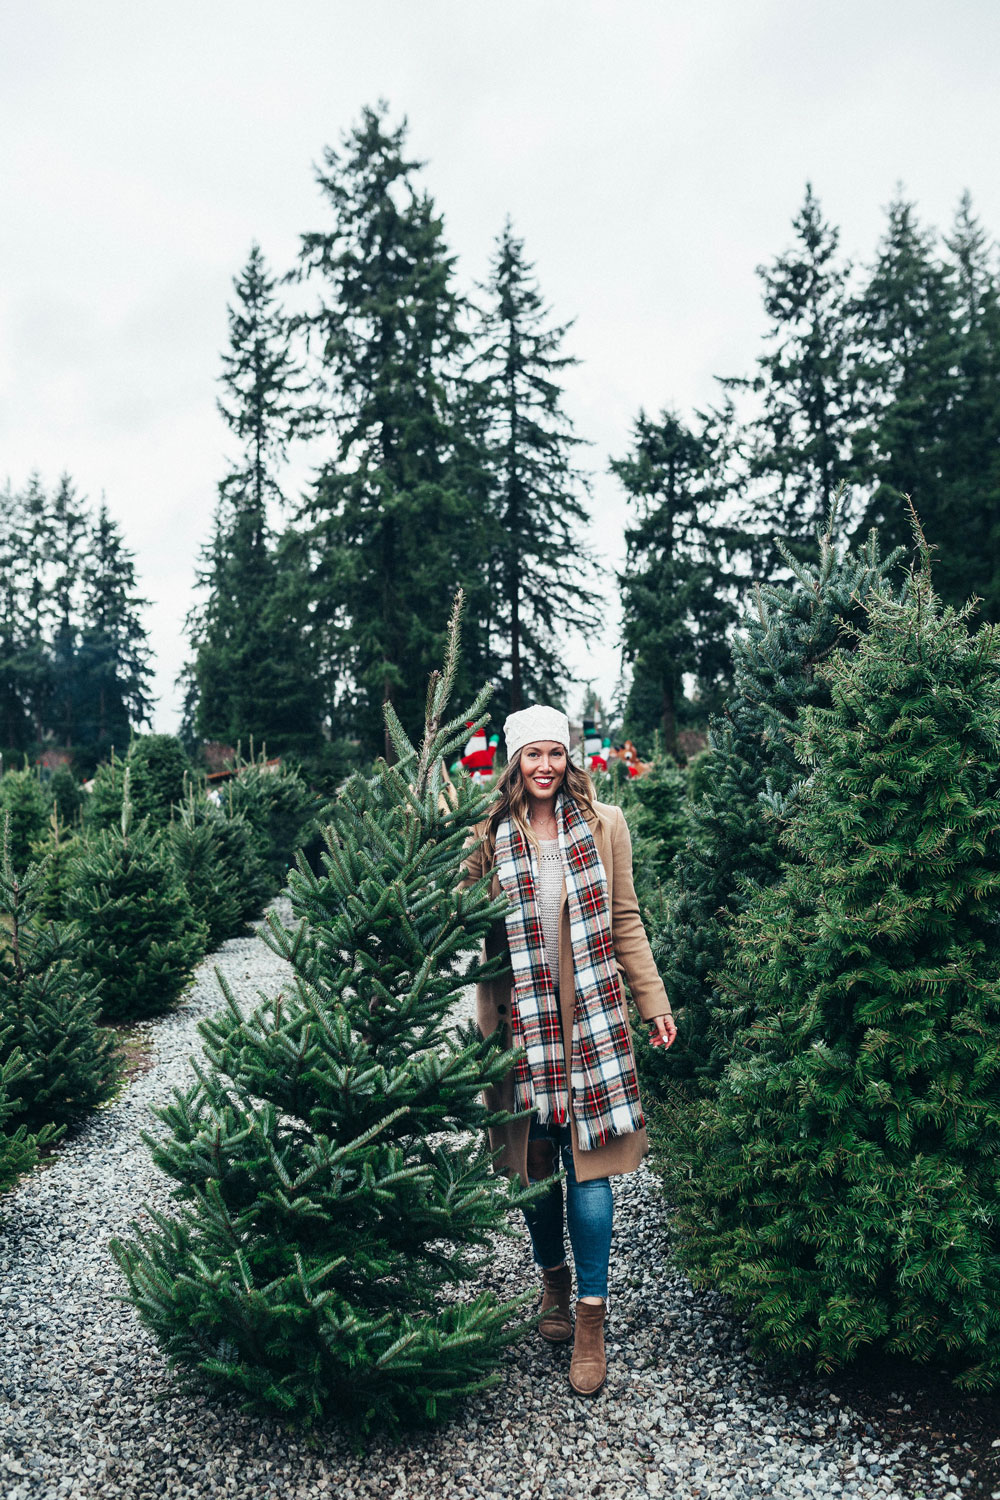 Best christmas tree farms vancouver by To Vogue or Bust